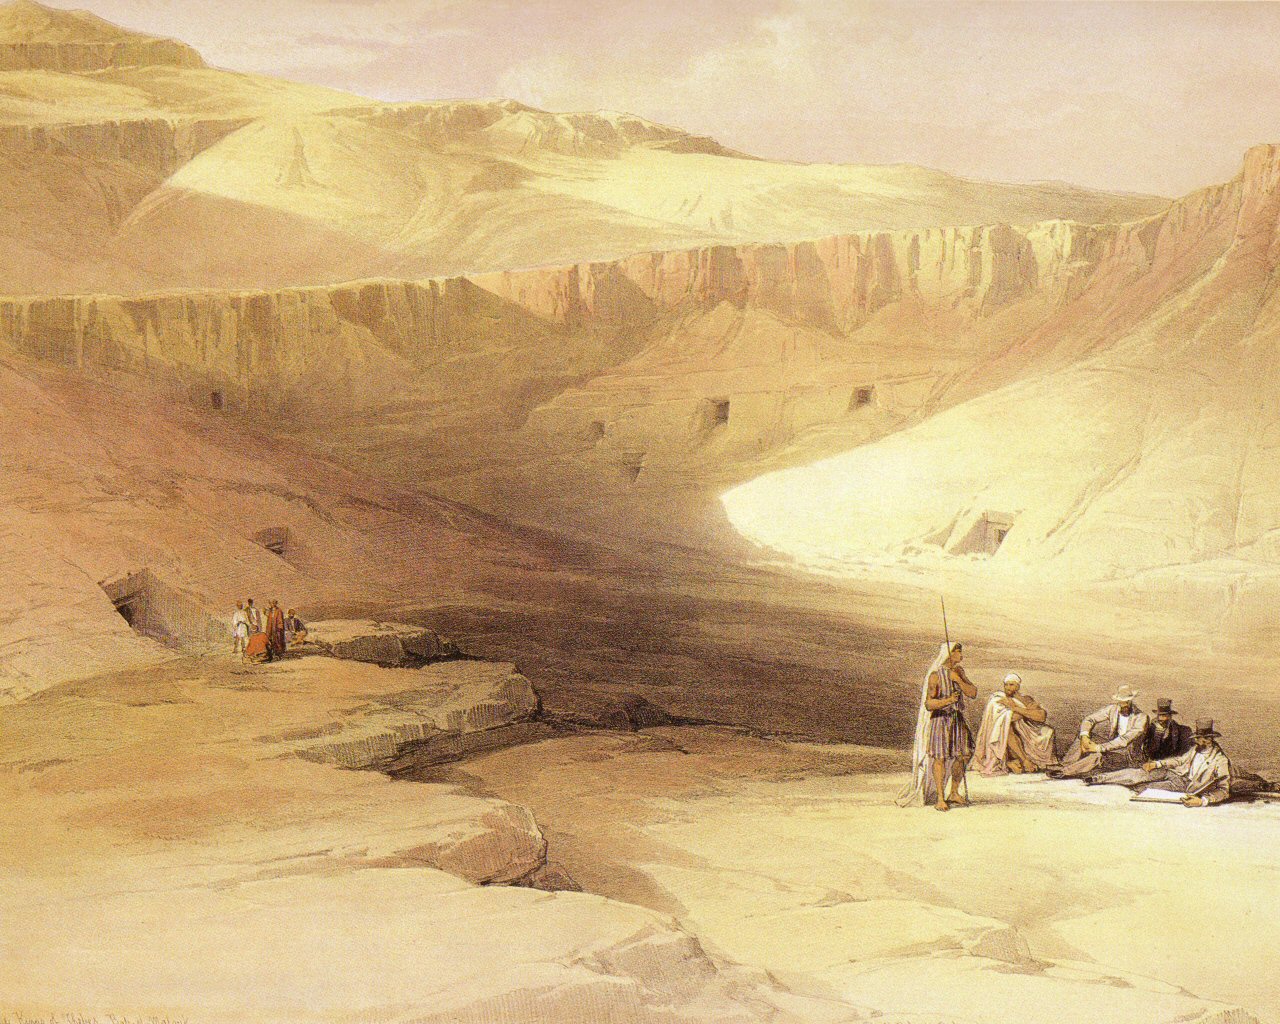 David_Roberts_25_The_Valley_Of_The_Kings_1280x1024.jpg